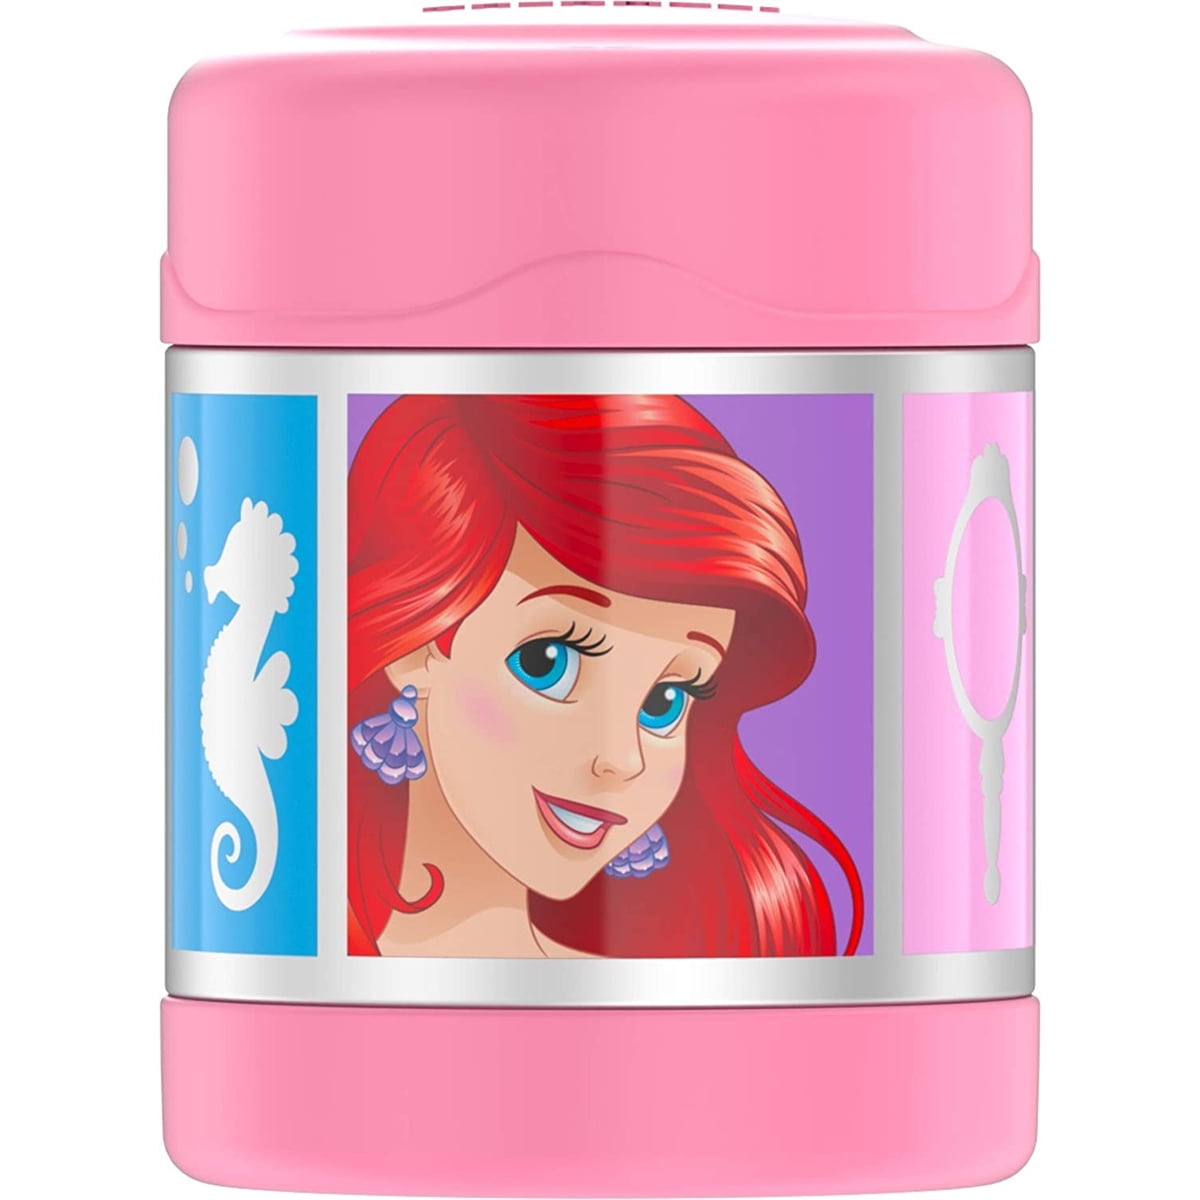  THERMOS FUNTAINER 10 Ounce Stainless Steel Vacuum Insulated Kids  Food Jar with Spoon, Preschool Minnie : Home & Kitchen